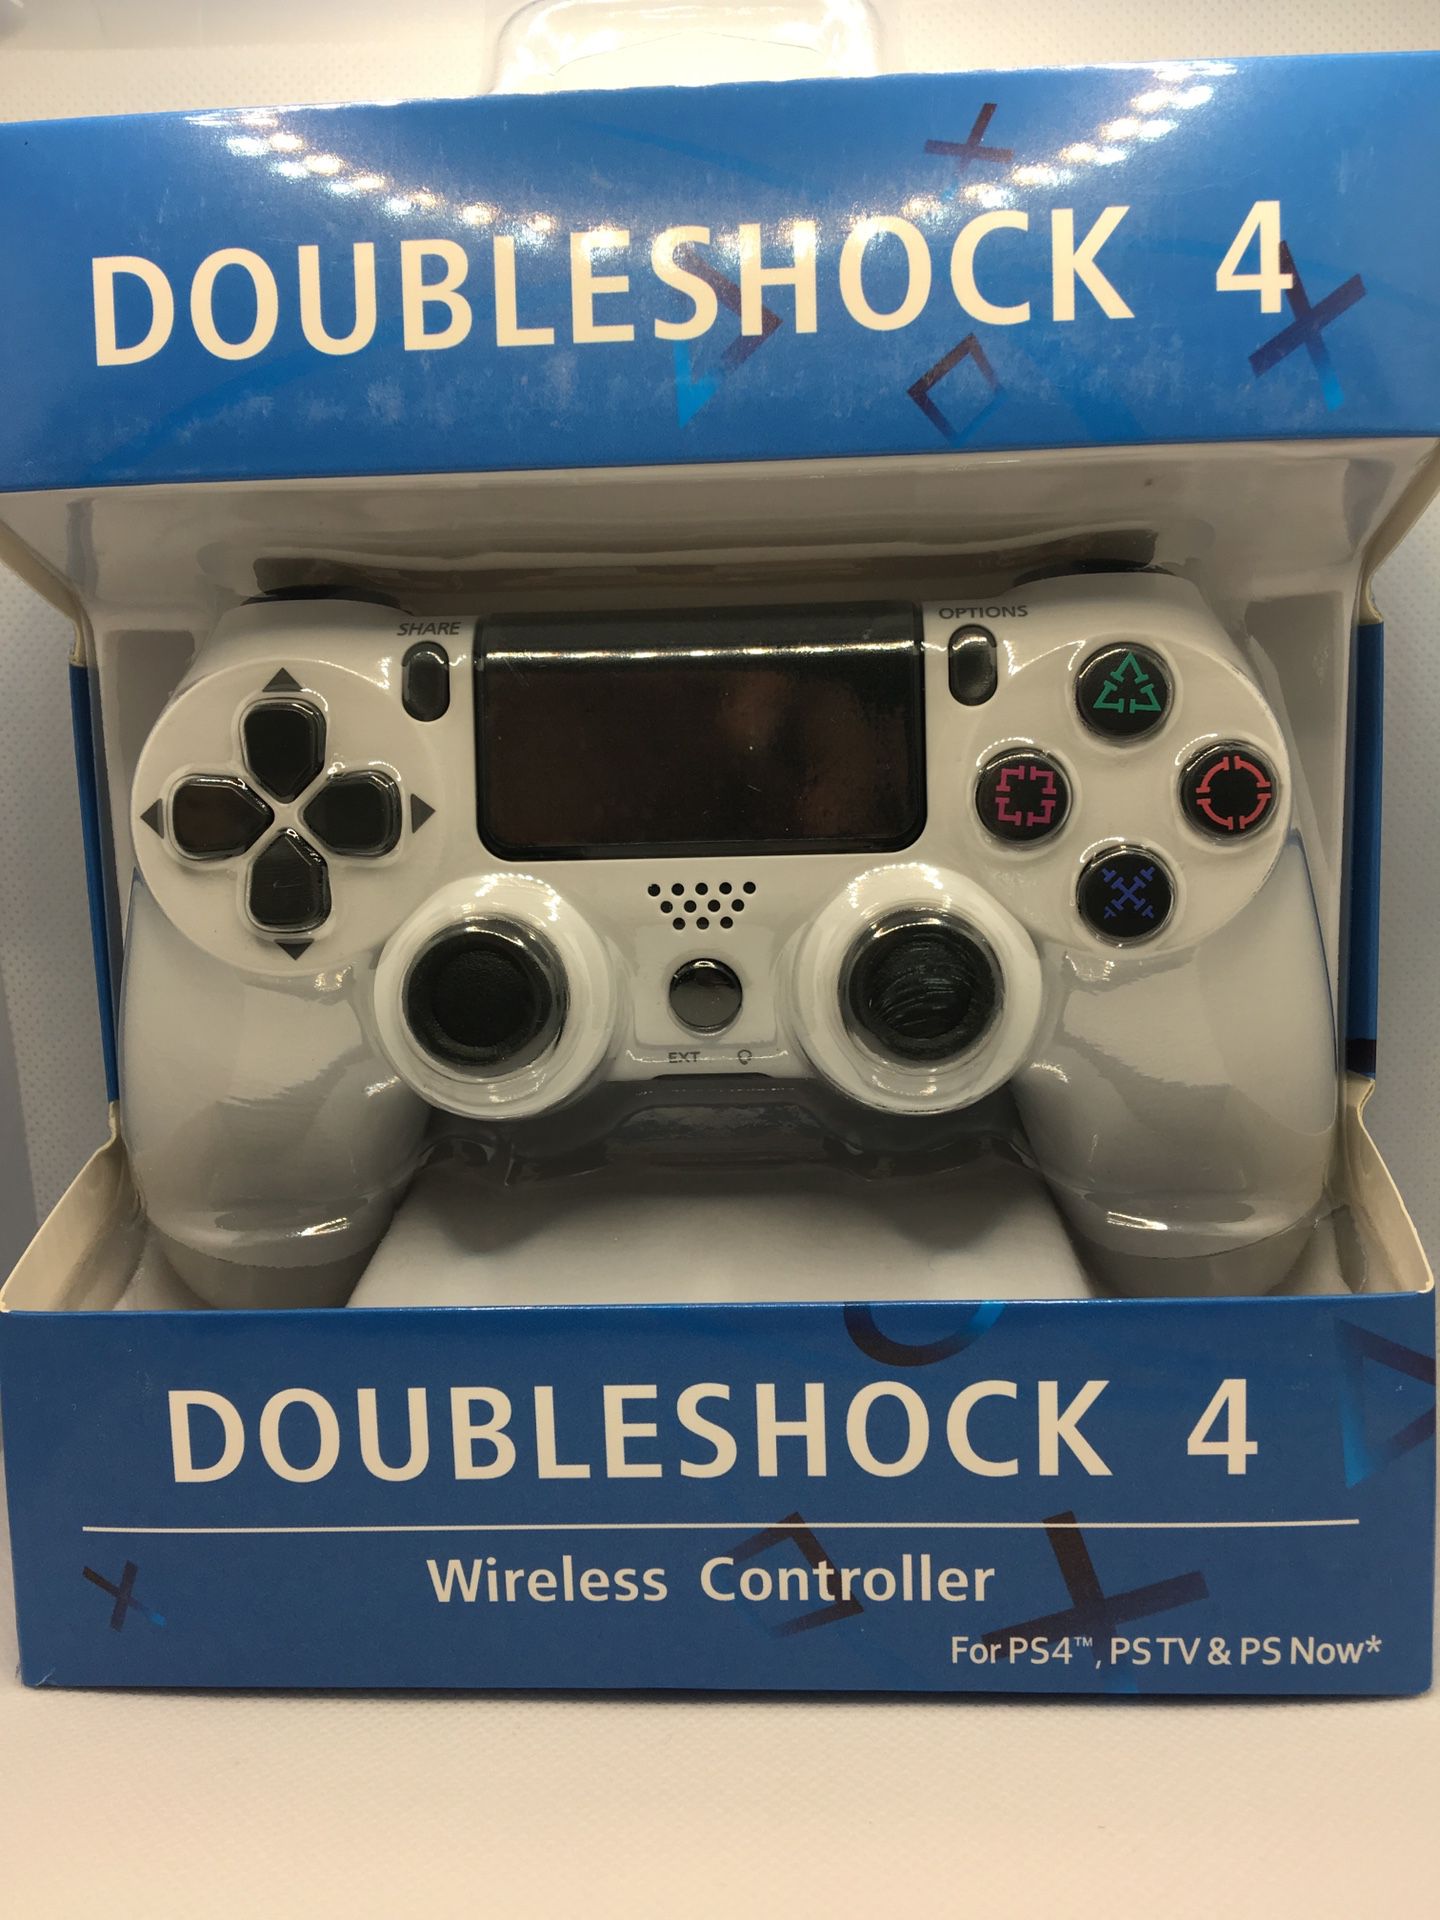 WIRELESS CONTROLLER DOUBLESHOCK FOR PLAYSTATION 4 (GENERIC BRAND)  